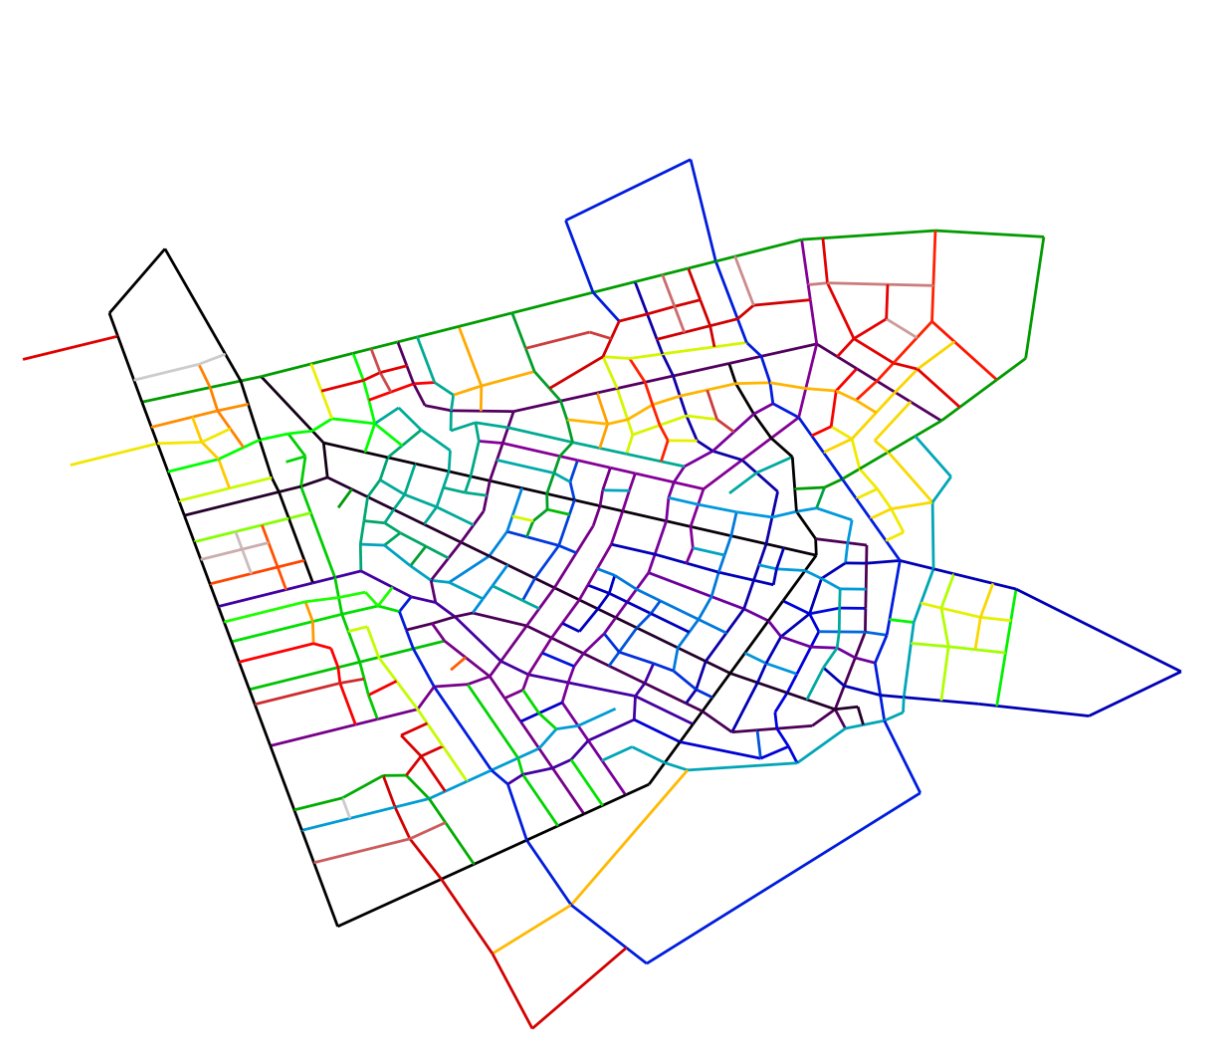 A colored road network generated by simulation